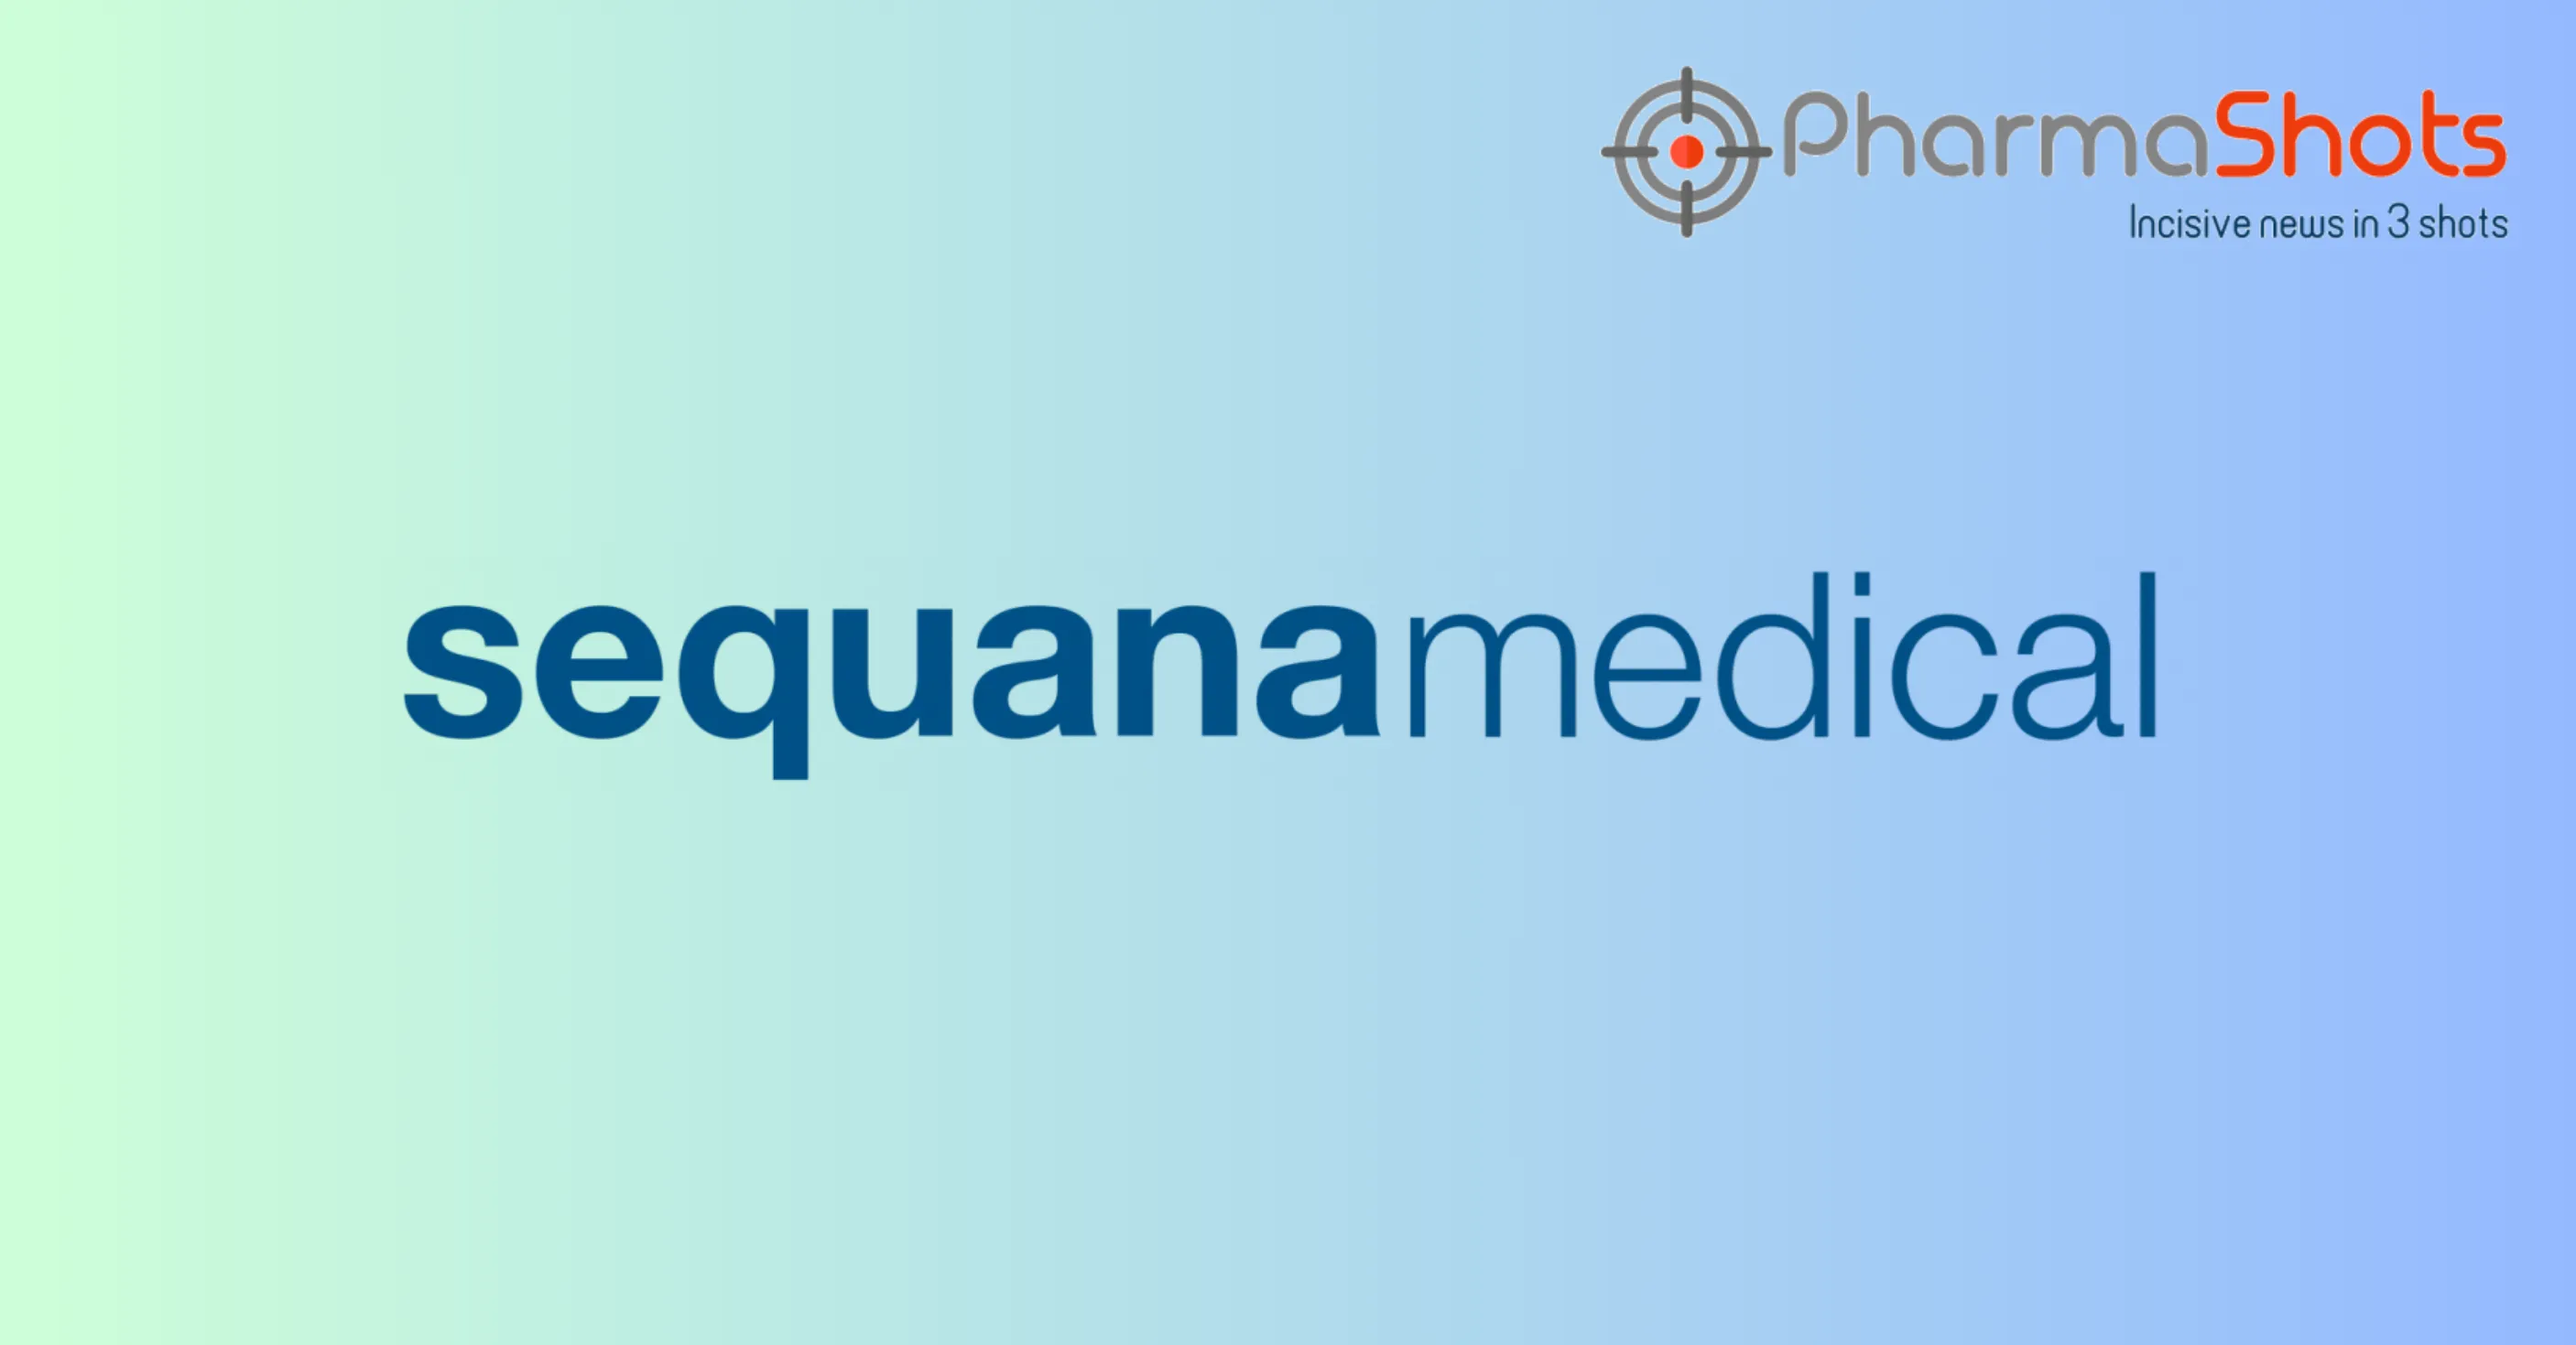 Sequana Medical Reports the Submission of Premarket Approval Application to the US FDA for alfapump to Treat Ascites due to Liver Cirrhosis